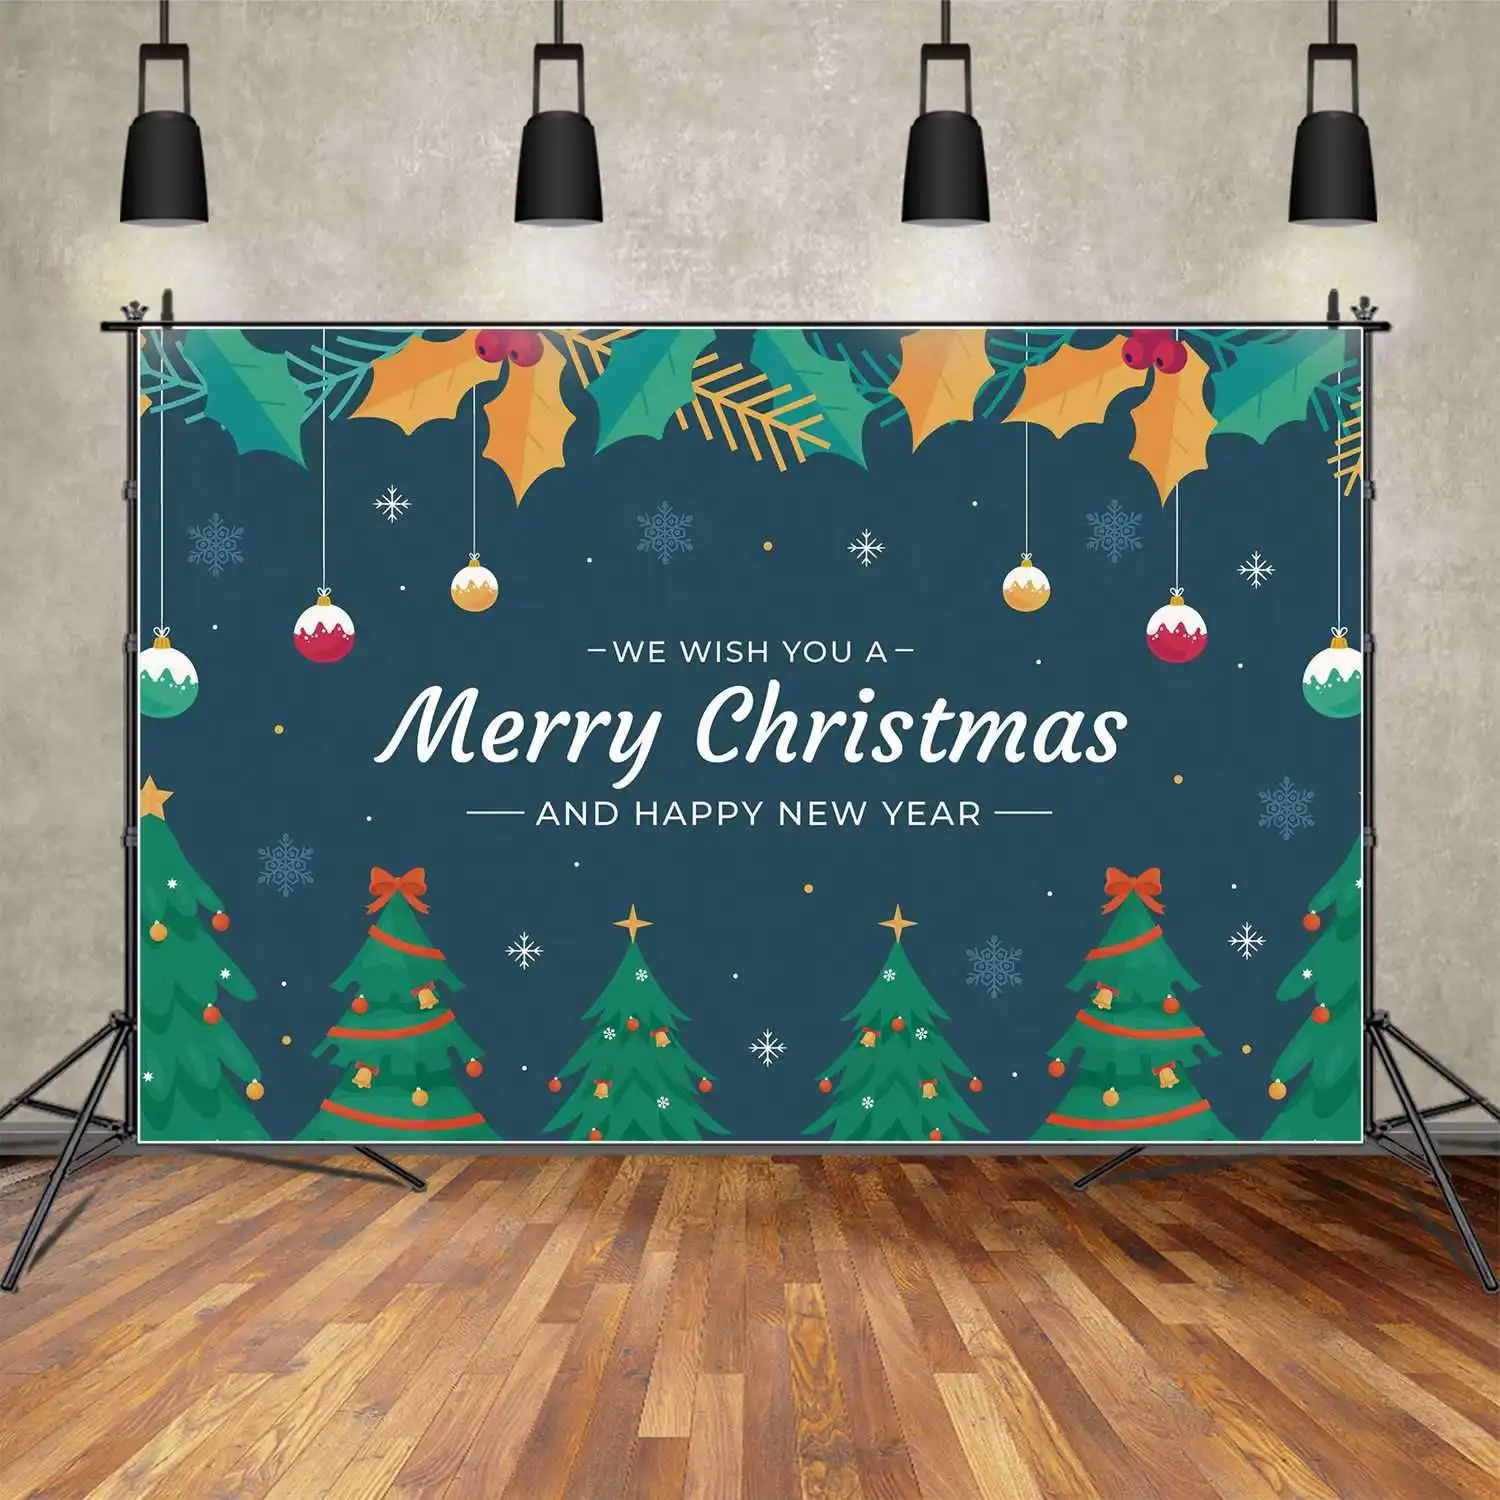 

MOON.QG Backdrop Merry Christmas Tree Banner Party Decoration Background Blue Snowflake Sky Bean Green Pine Photo Booth Props